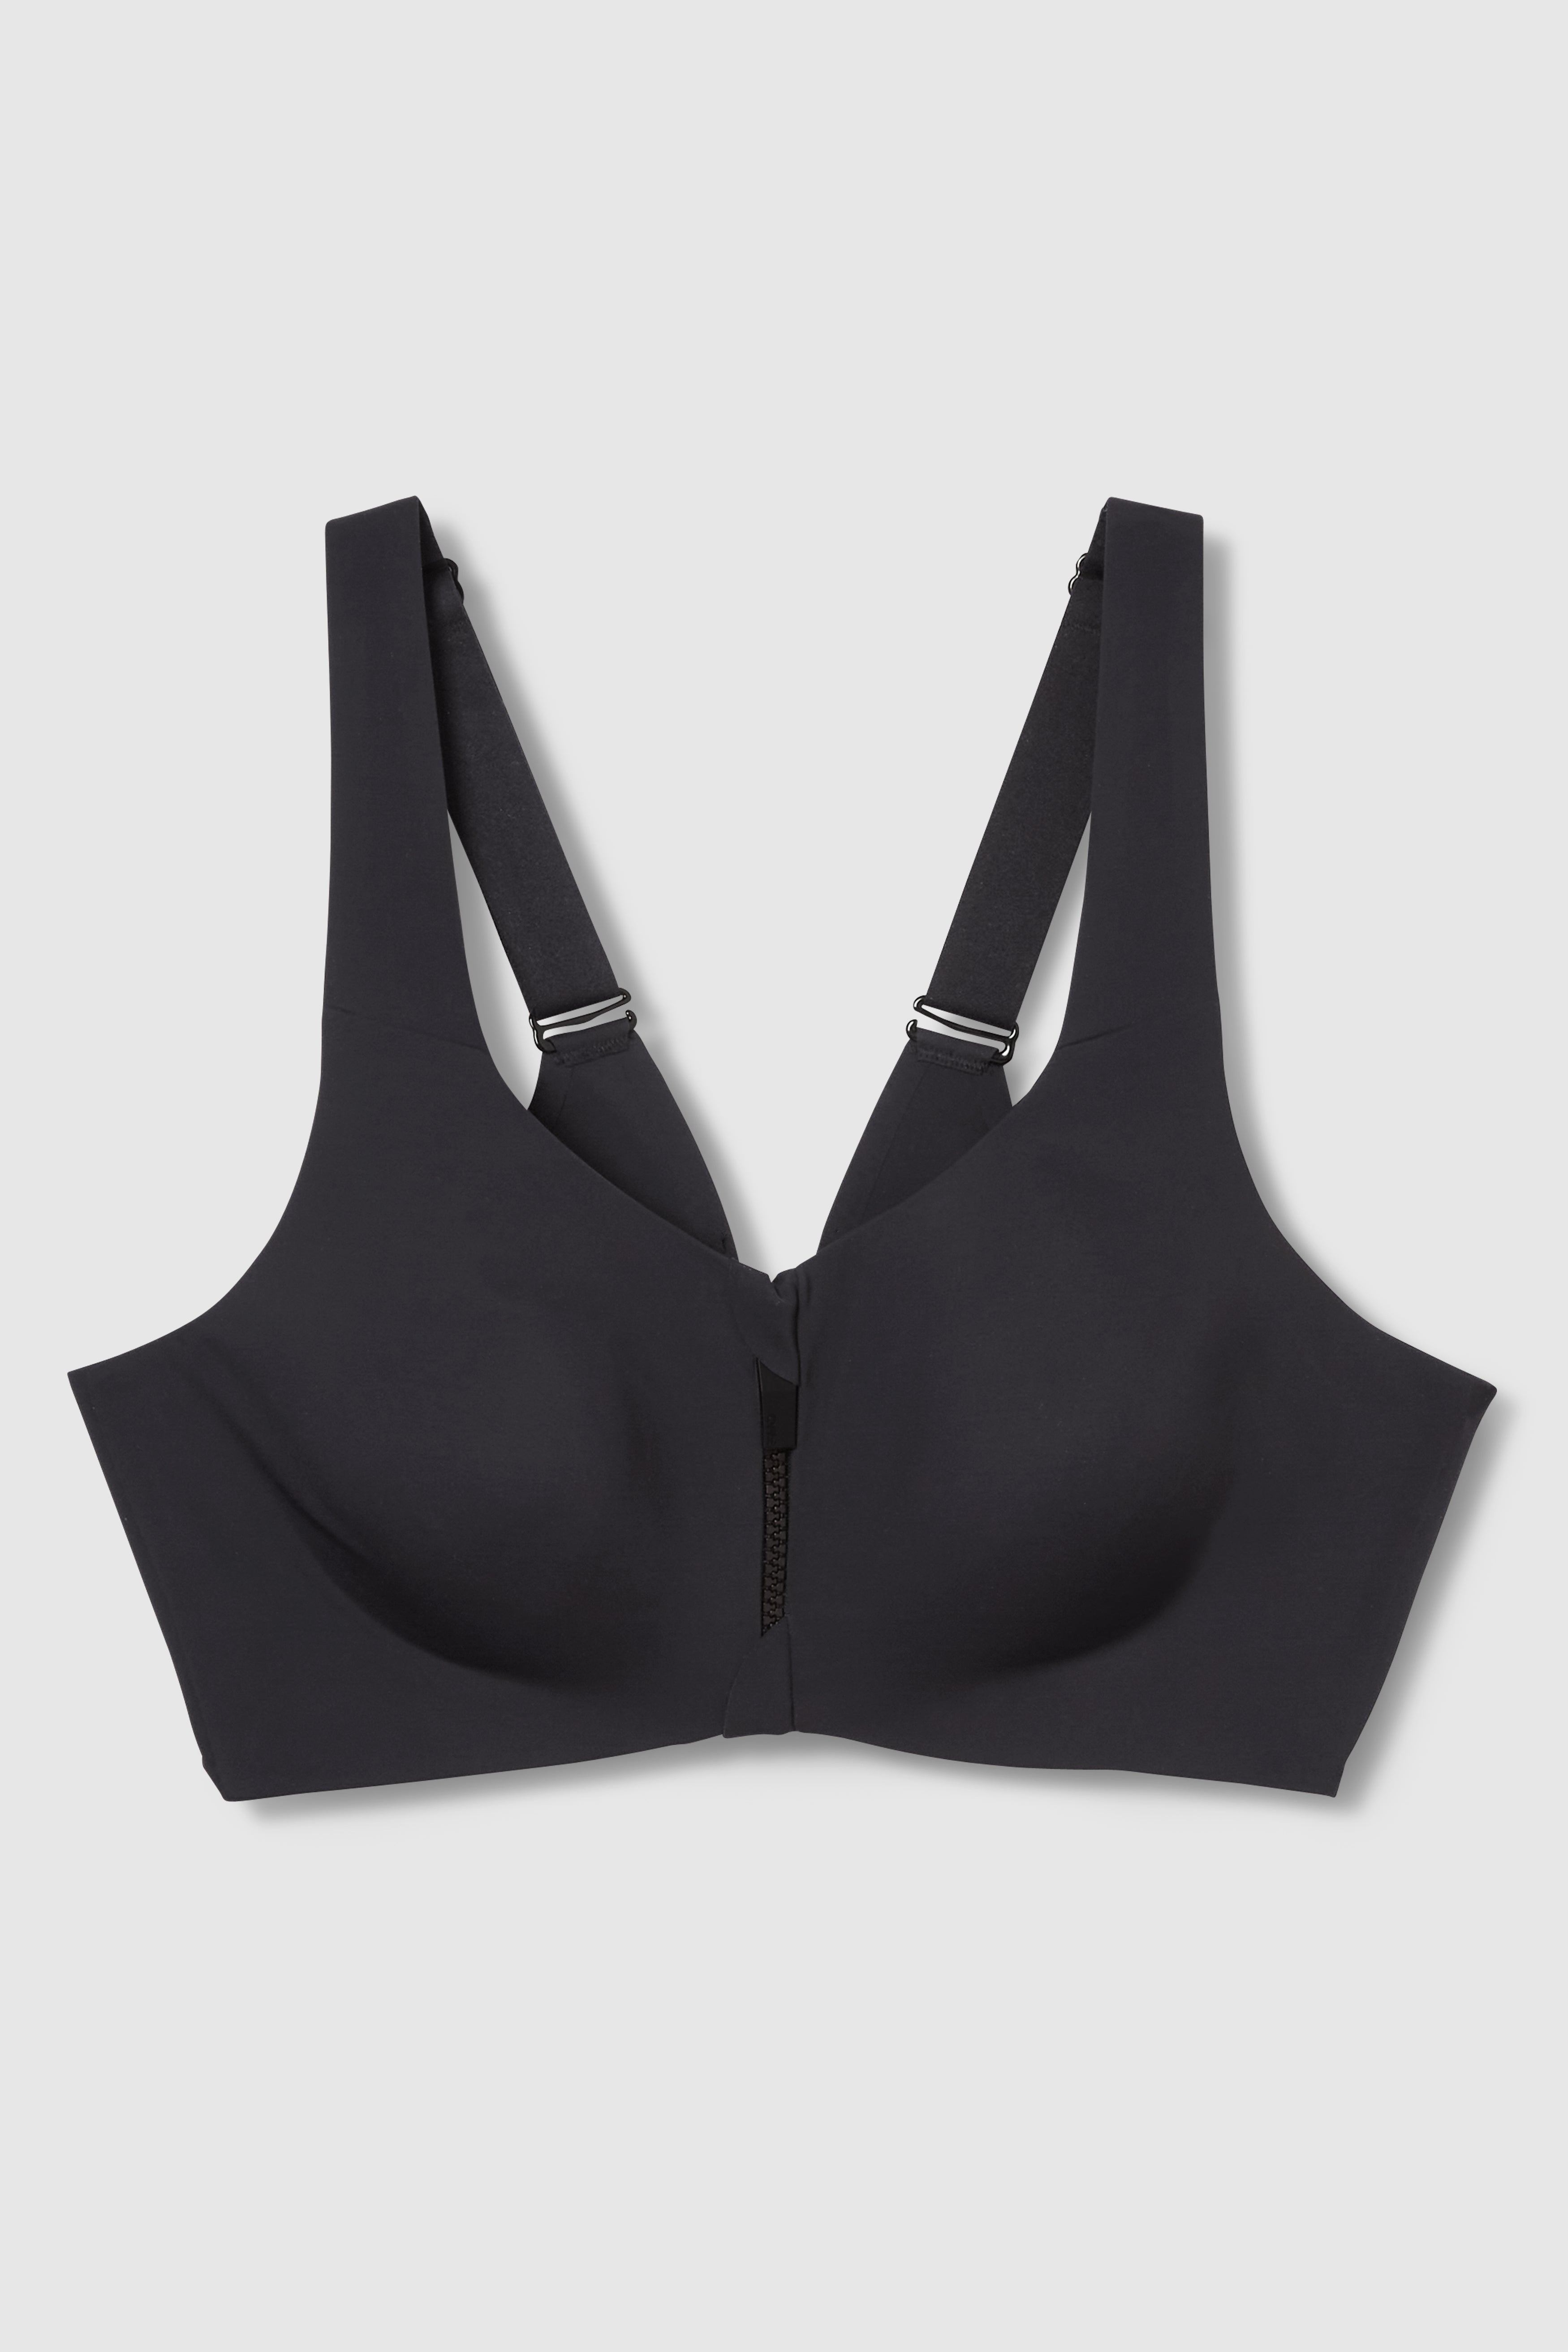 Buy Dw165 Women Fitness High Impact Front Zipper Energy Bra Push Up Racer  Back Gym Athletic Shockproof Workout Bra from Hangzhou Shangyou Apparel  Co., Ltd., China